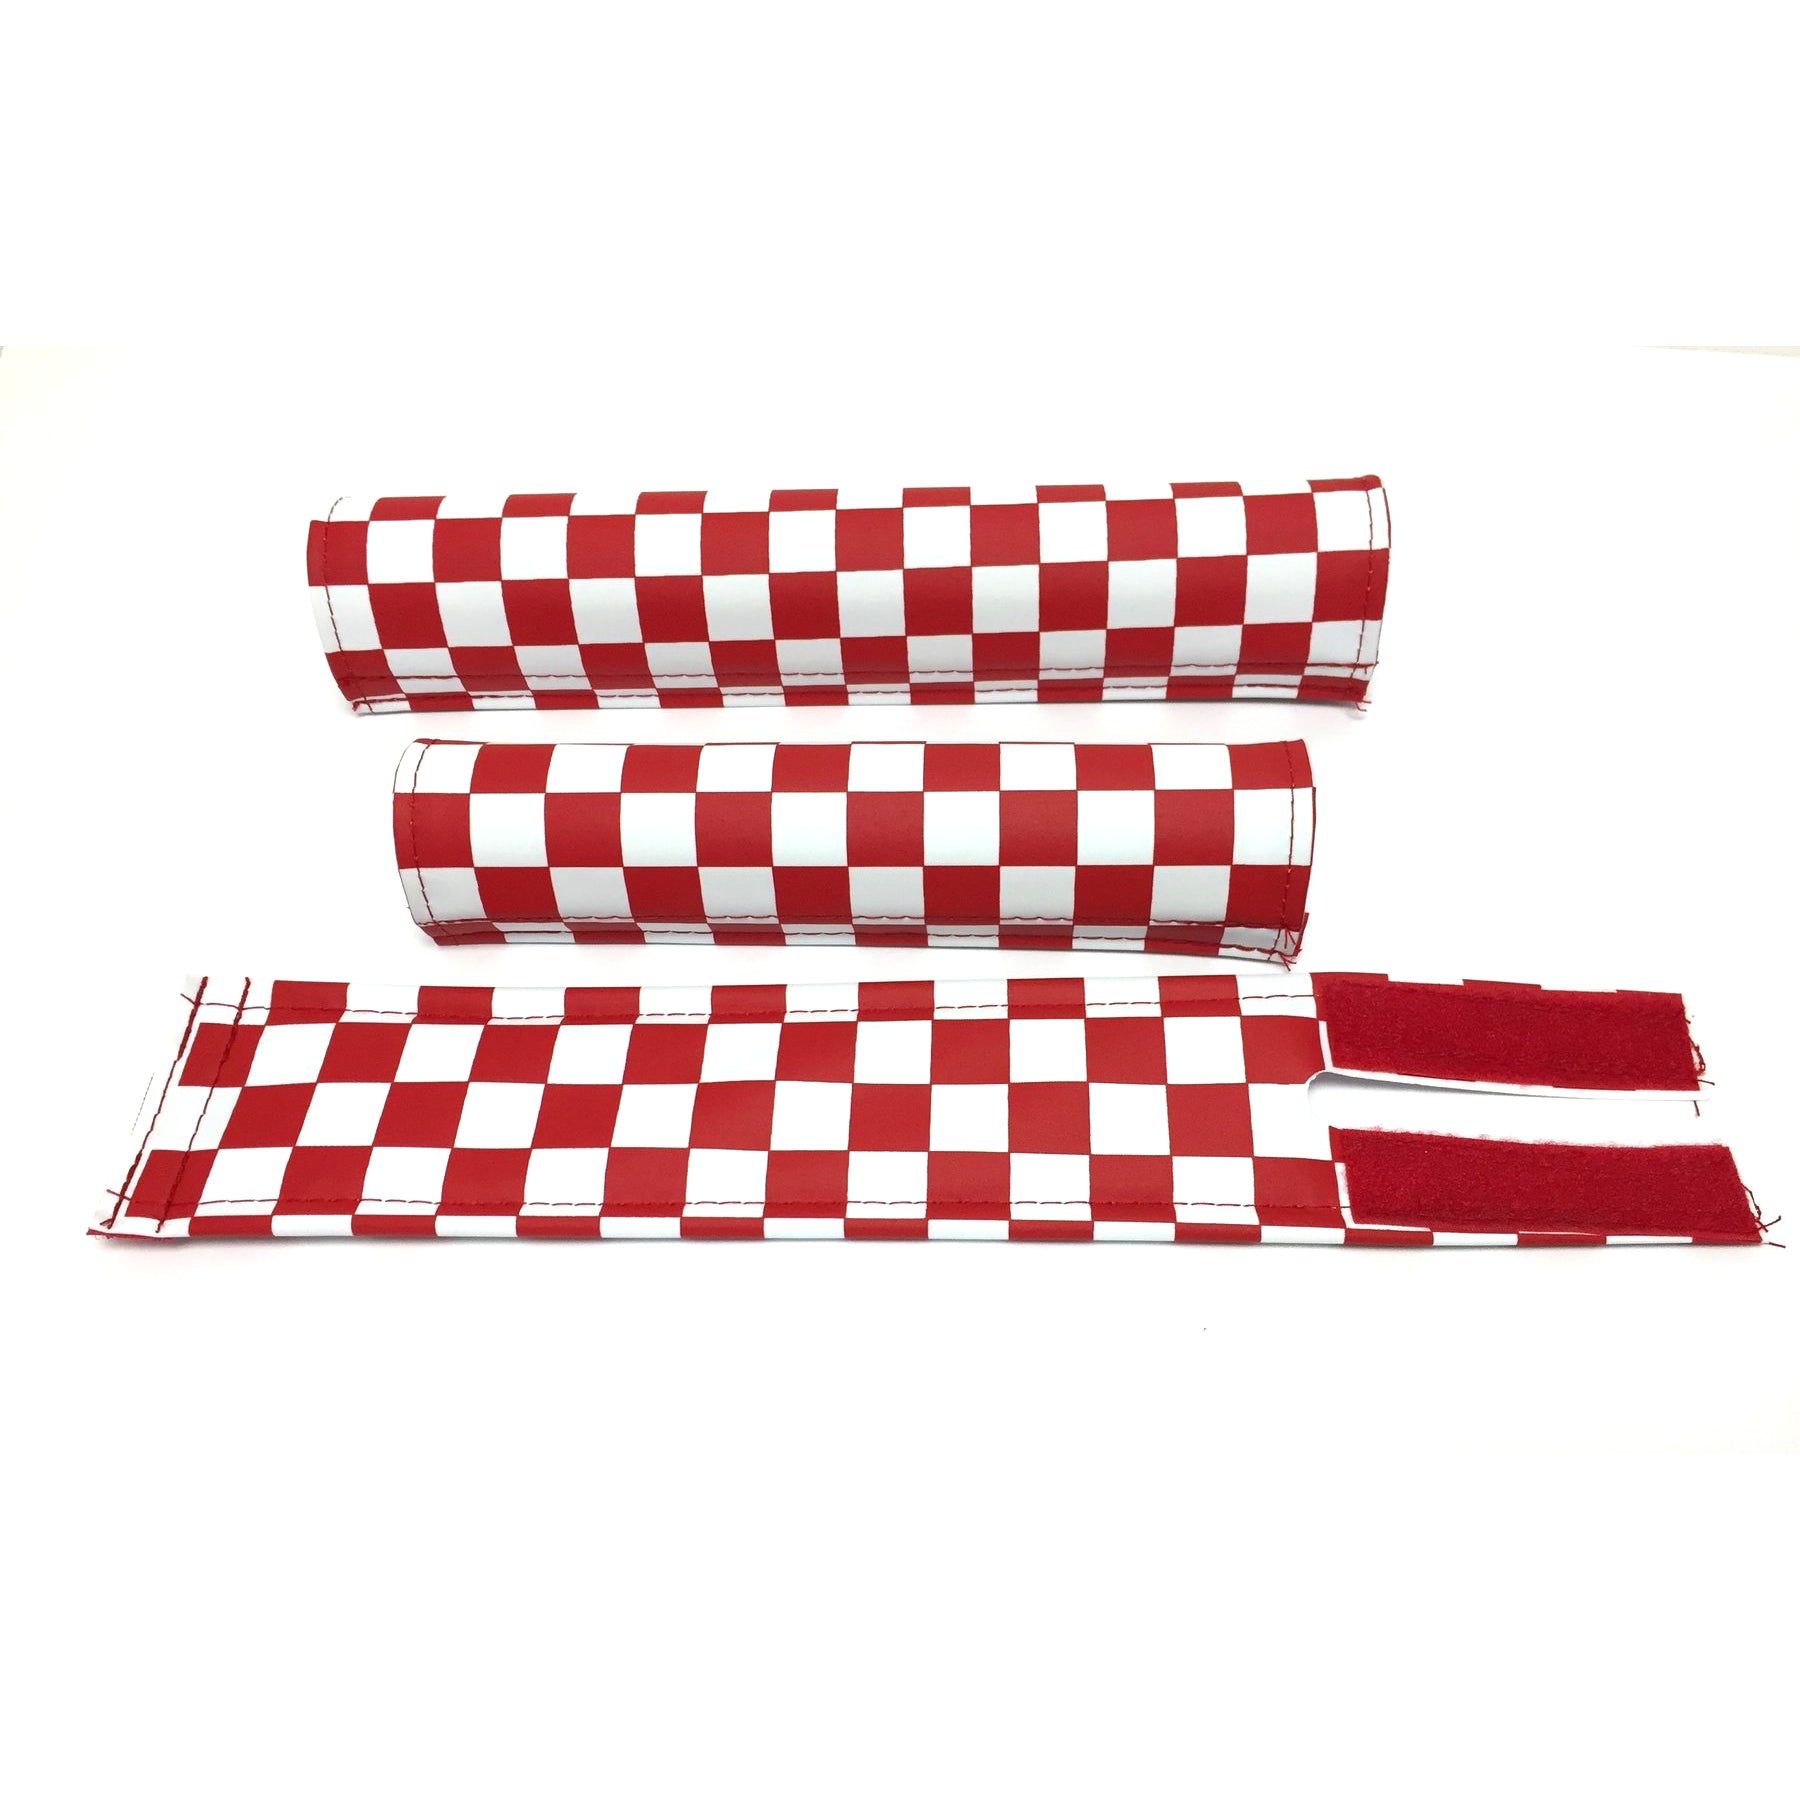 Flite Classic BMX 3 Piece Padset - Red & White Checkerboard - USA Made